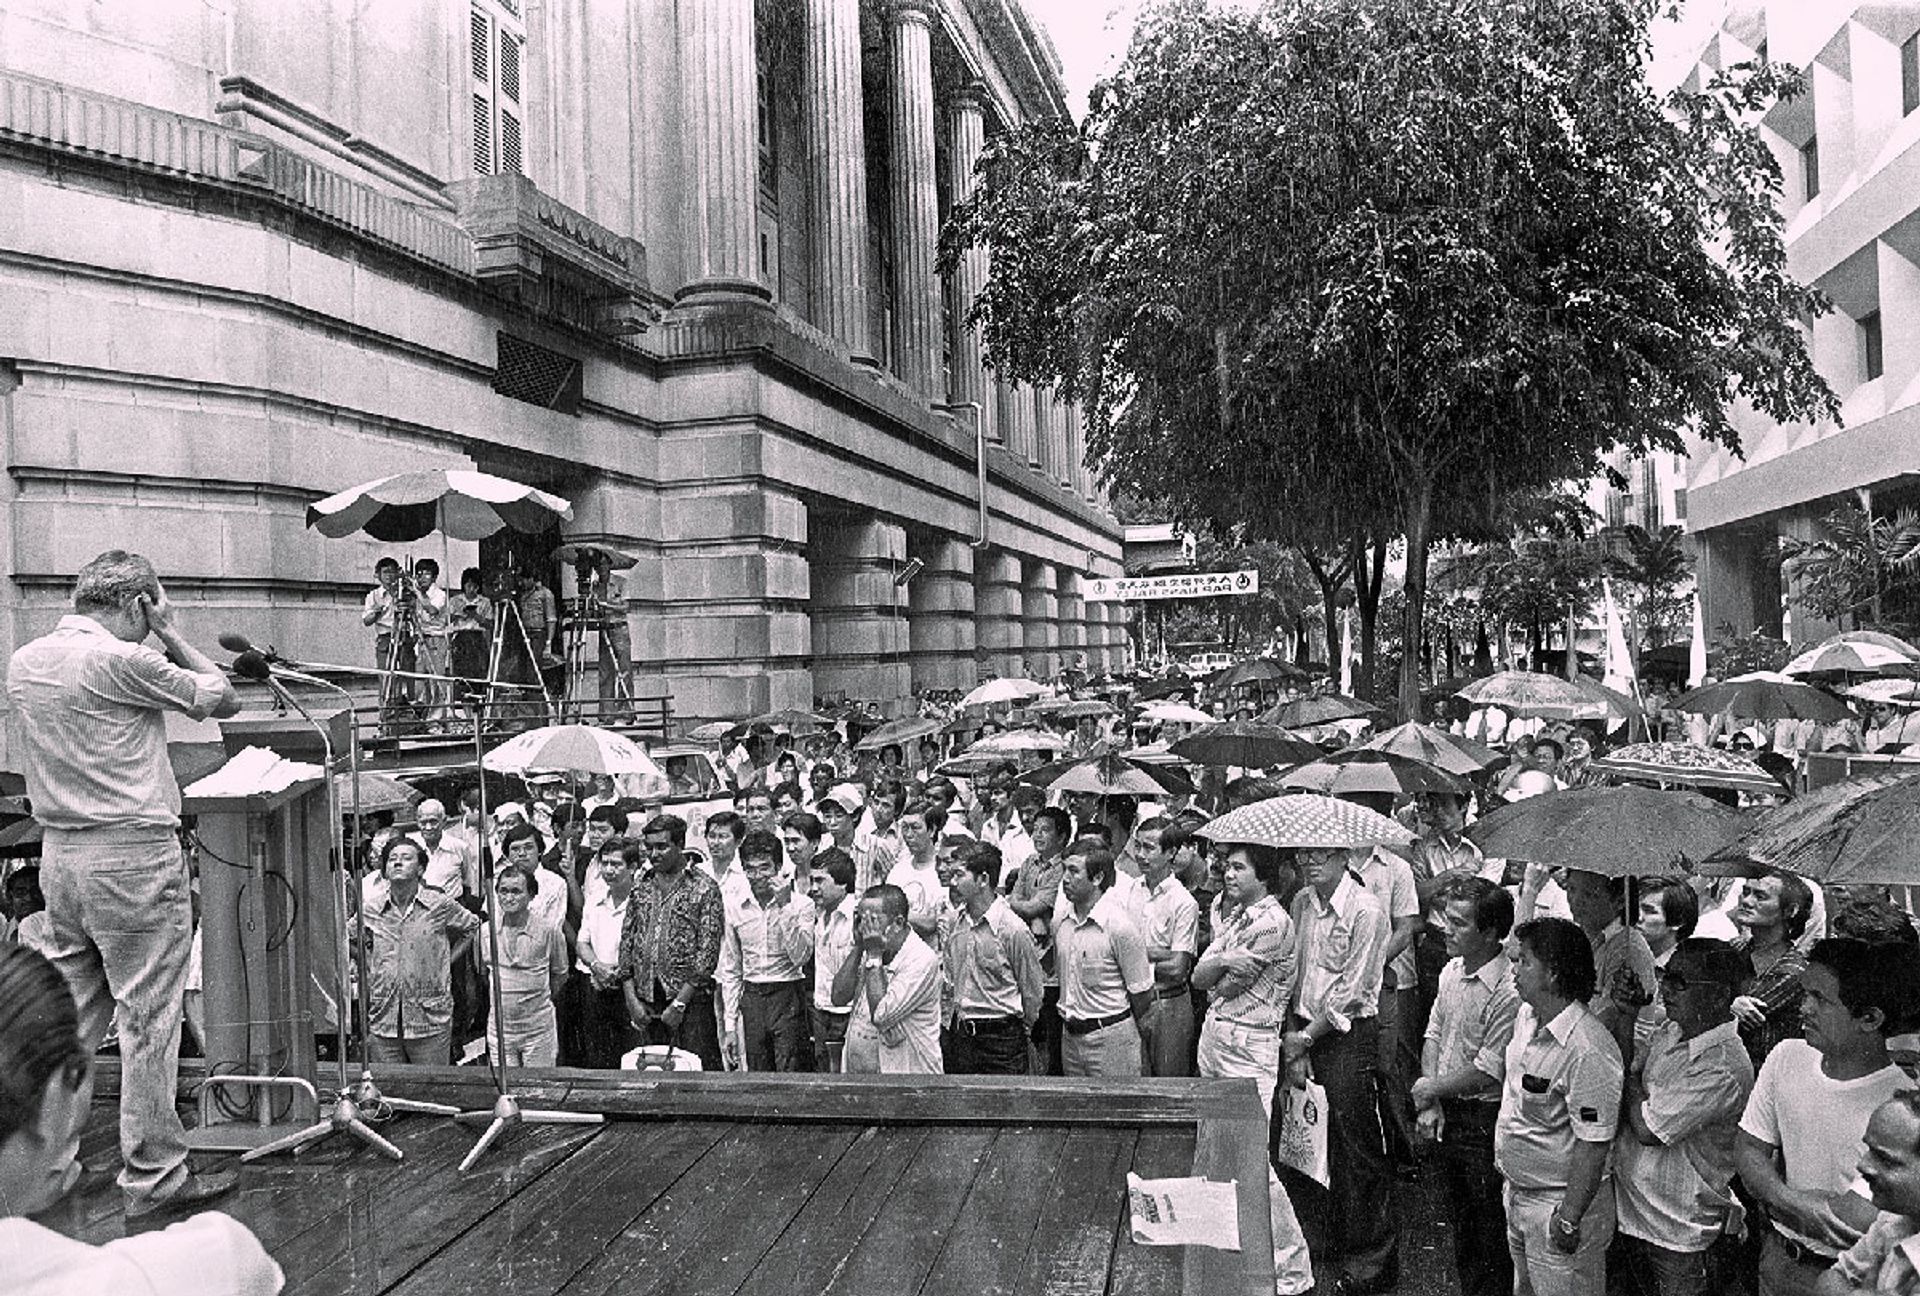 Mr Lee campaigning in the rain during a lunchtime rally at Fullerton Square on Dec 19, 1980. The crowd braved the downpour to hear him speak. ST Photo: Mazlan Badron